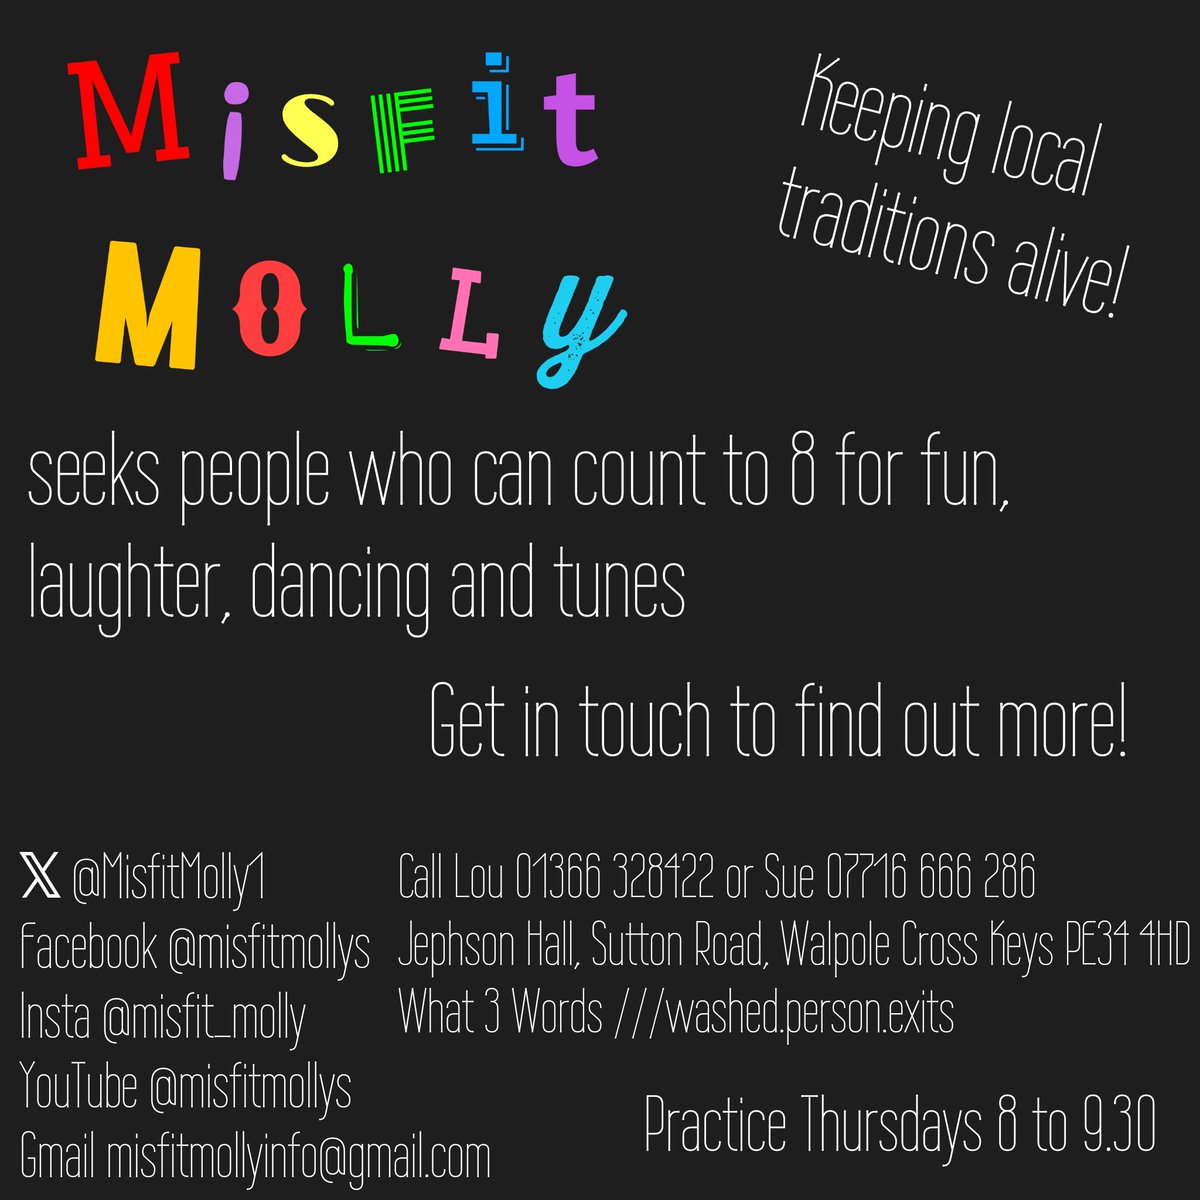 It's Wednesday today, so Misfits will be practicing tomorrow night. Come along to find out what you're missing 😀 #mollymalarkey